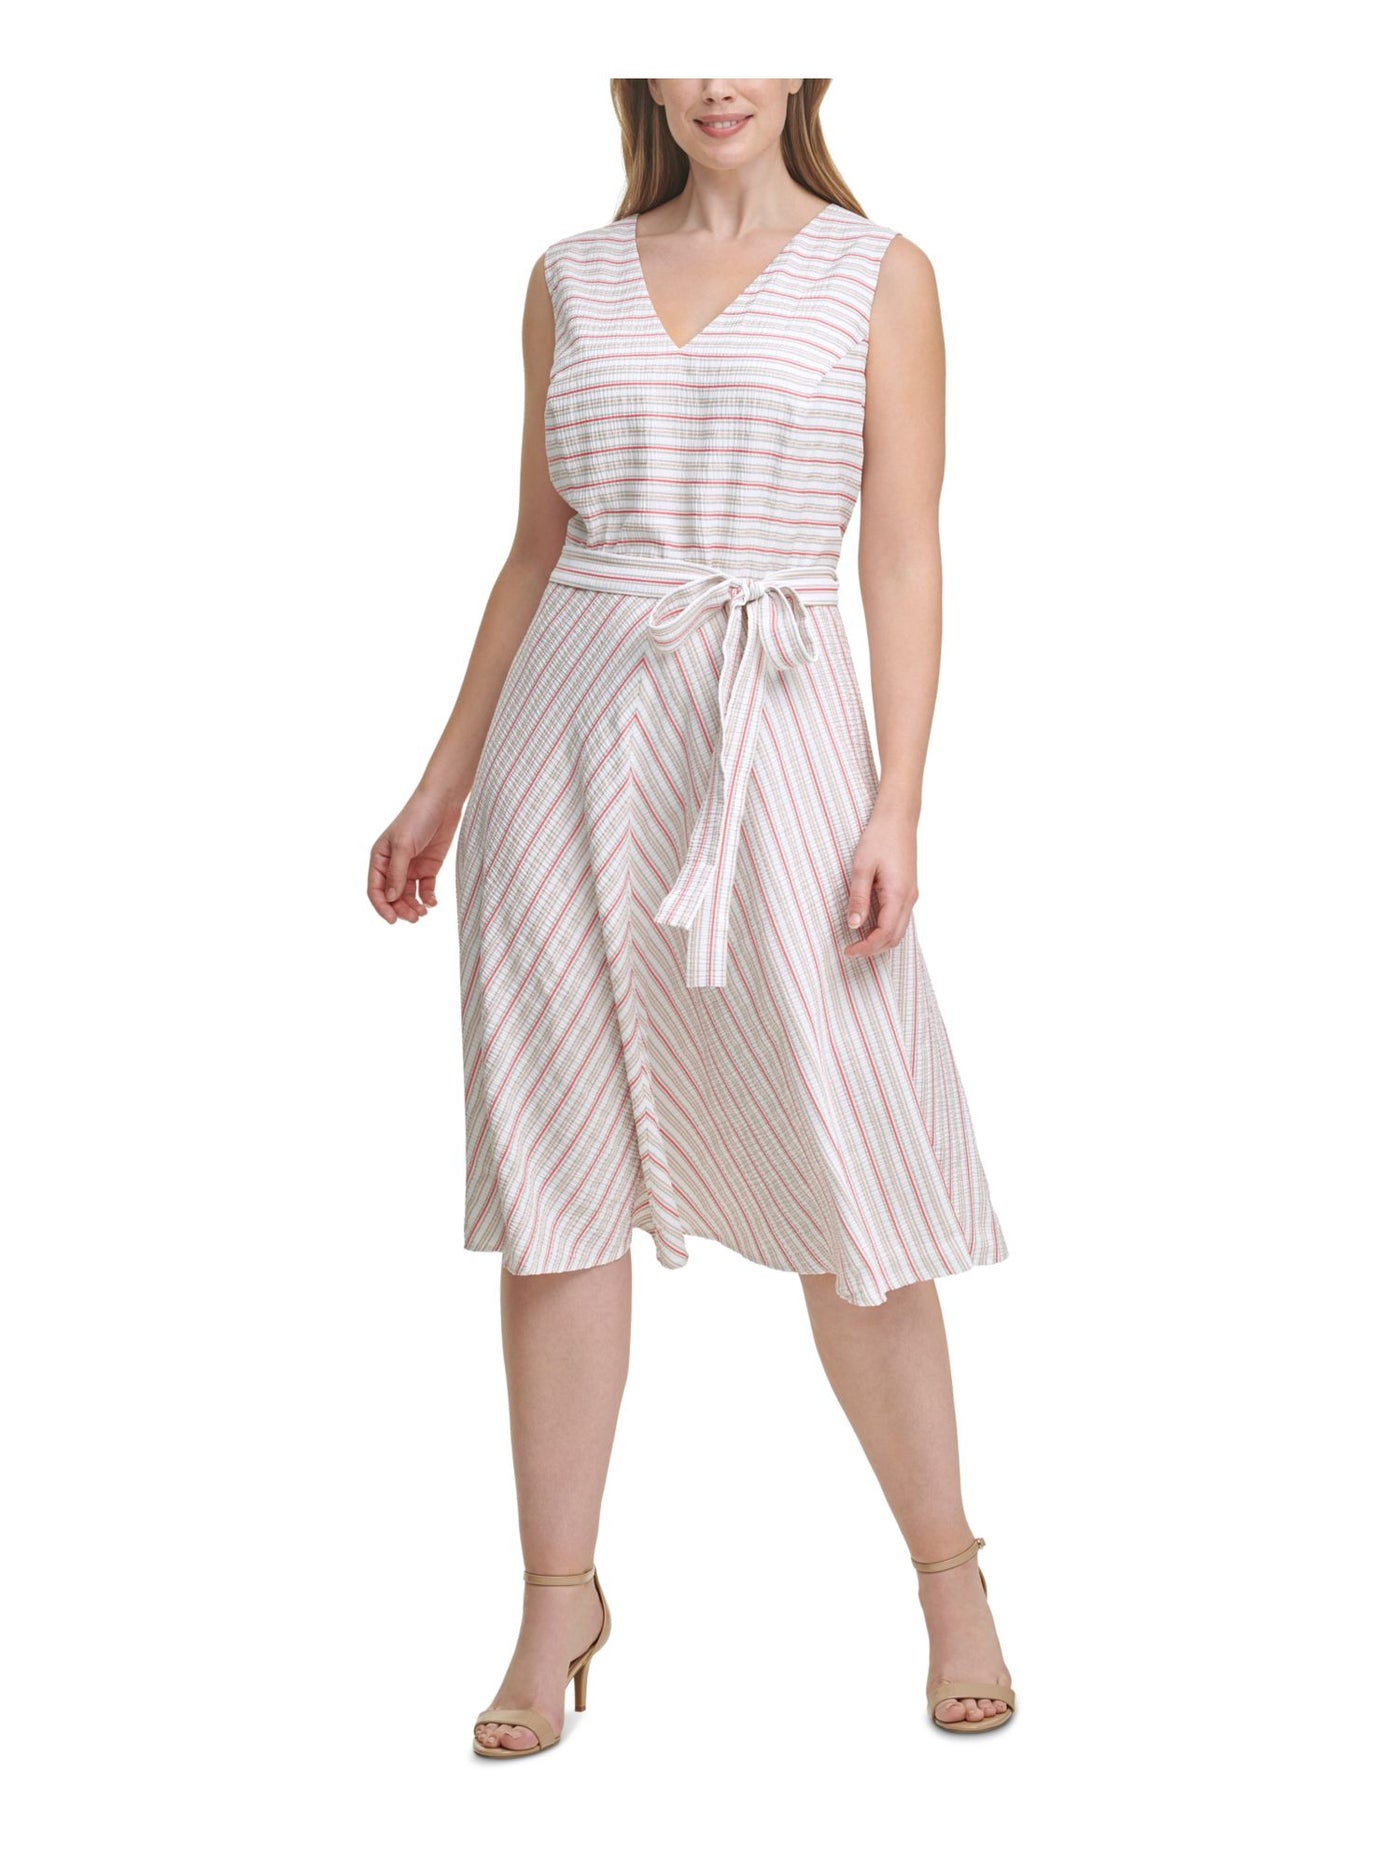 TOMMY HILFIGER Womens Ivory Zippered Tie Striped Sleeveless V Neck Below The Knee Fit + Flare Dress 14W